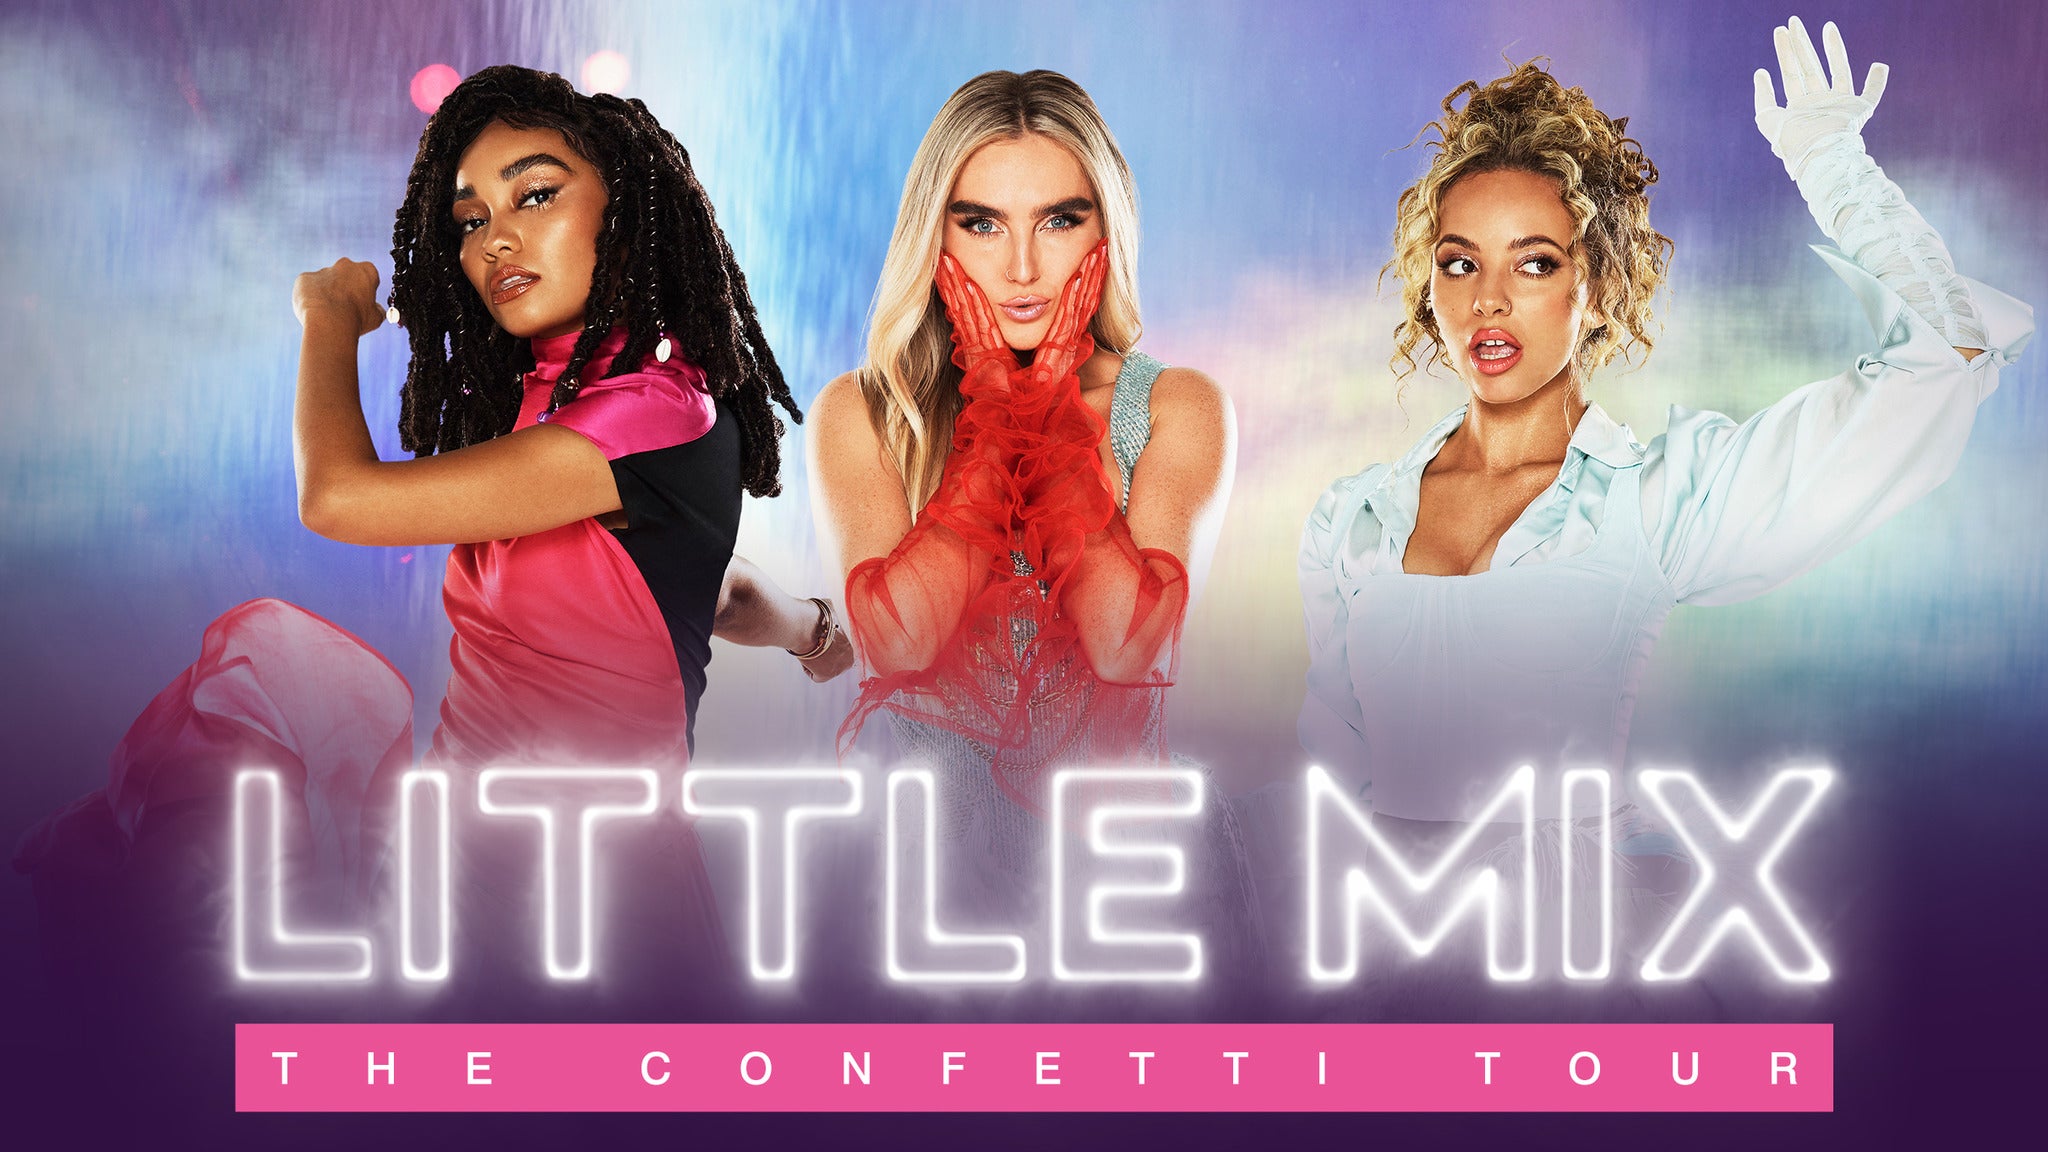 Win an exclusive private box to see Little Mix The Confetti Tour!